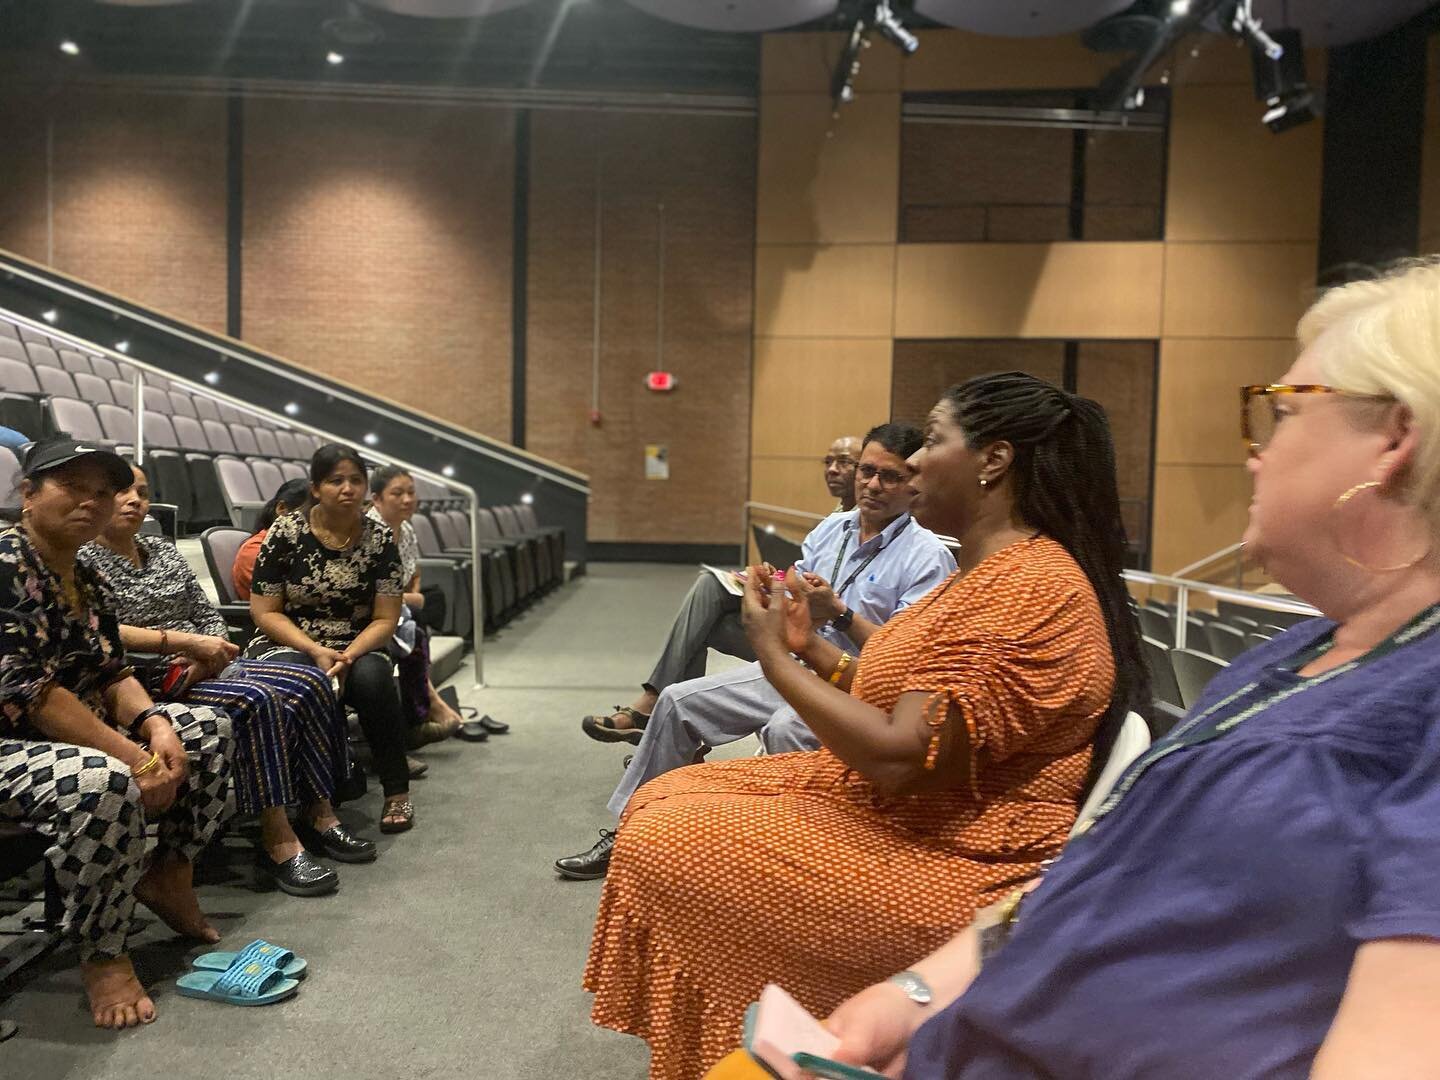 Last weekend I participated in a community listening session with @winooskilearns Elementary school principal Sara Raab and Deputy Commissioner of the Family Services Division at DCF, Aryka Radke. We listened to concerns from Nepali, Somali and Swahi